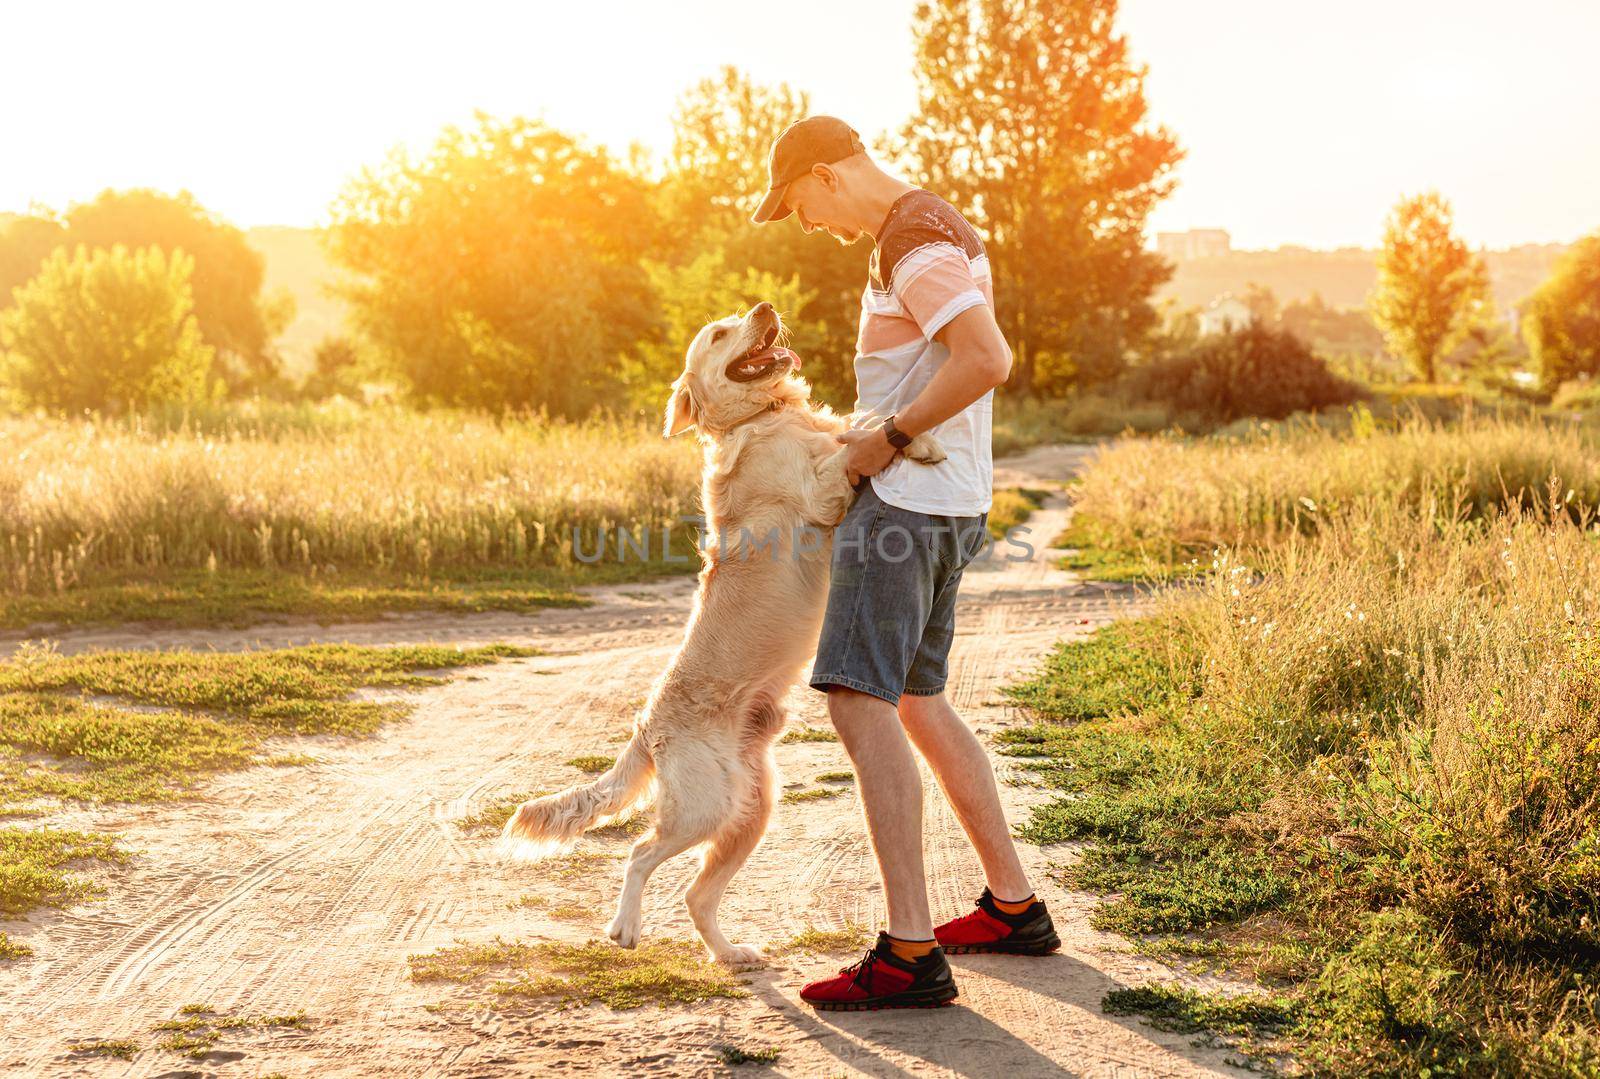 Golden retriever dog standing on back paws next to man outdoors at sunset